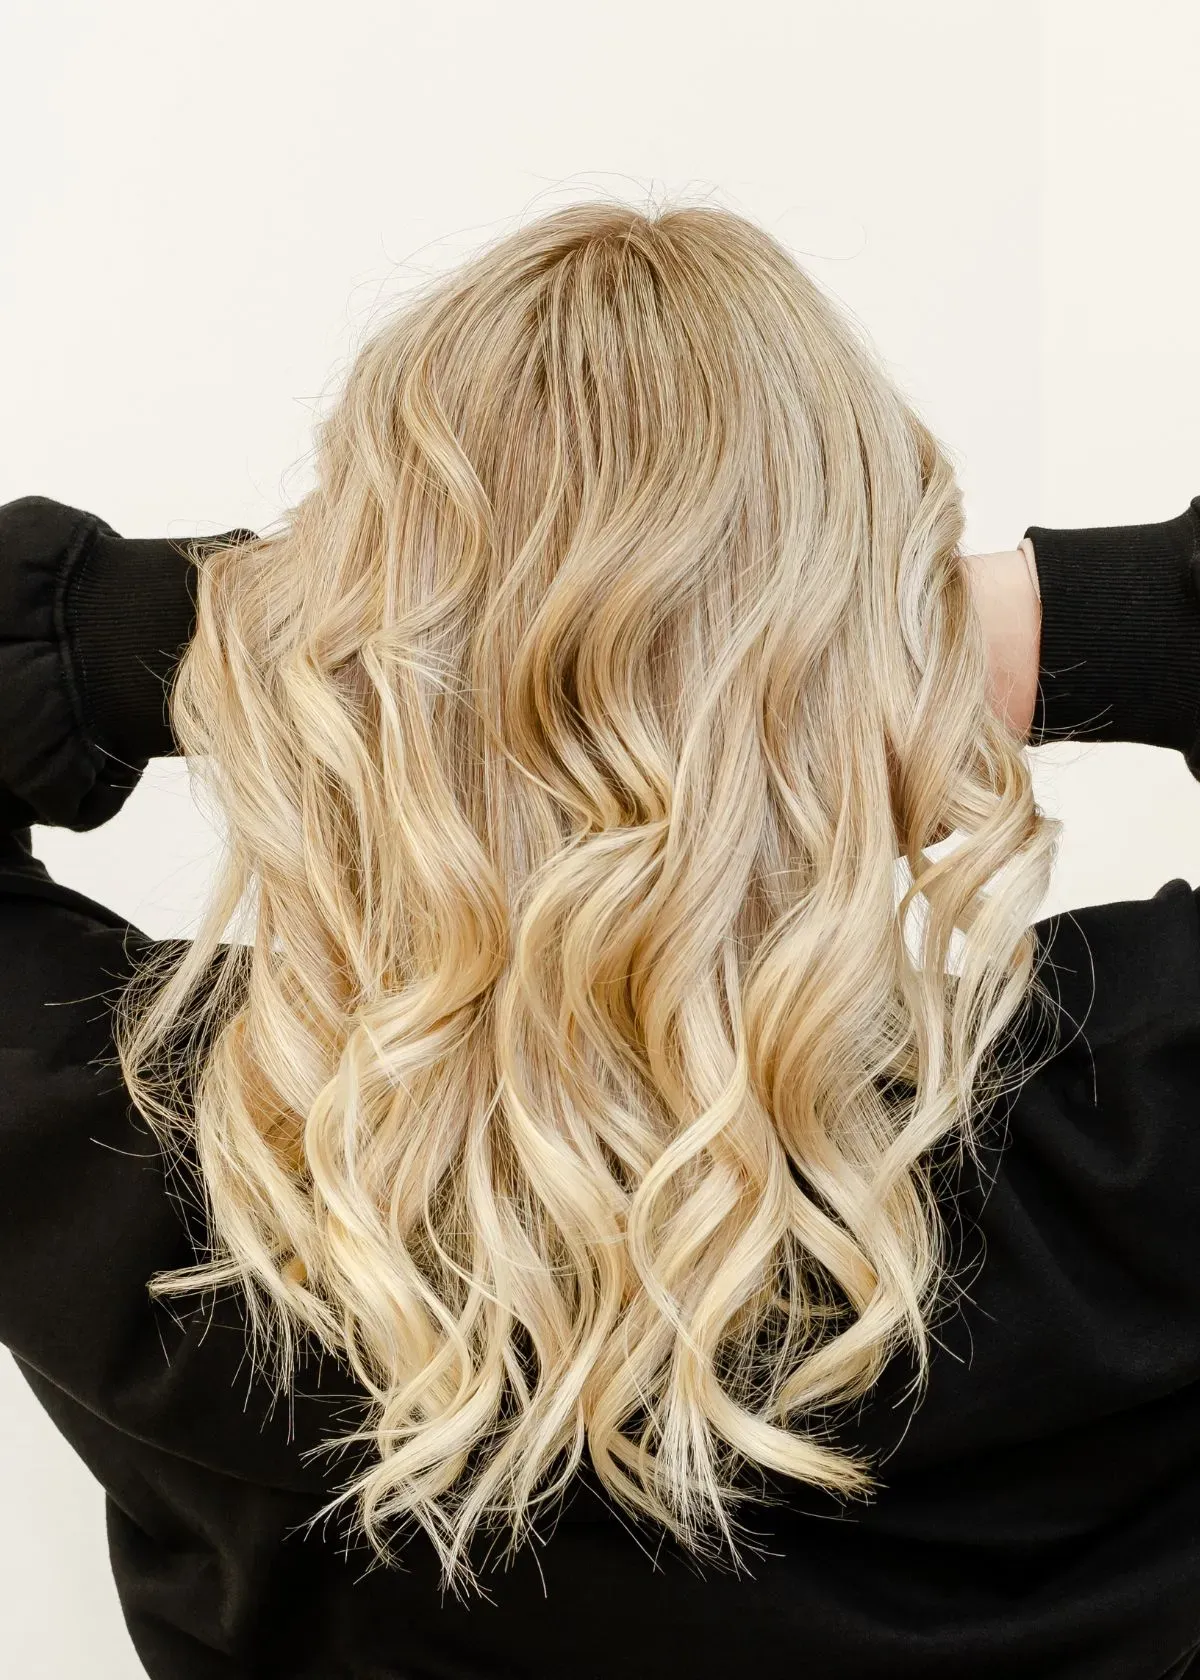 Can I Bleach My Hair Again After 24 Hours? Expert's Insights